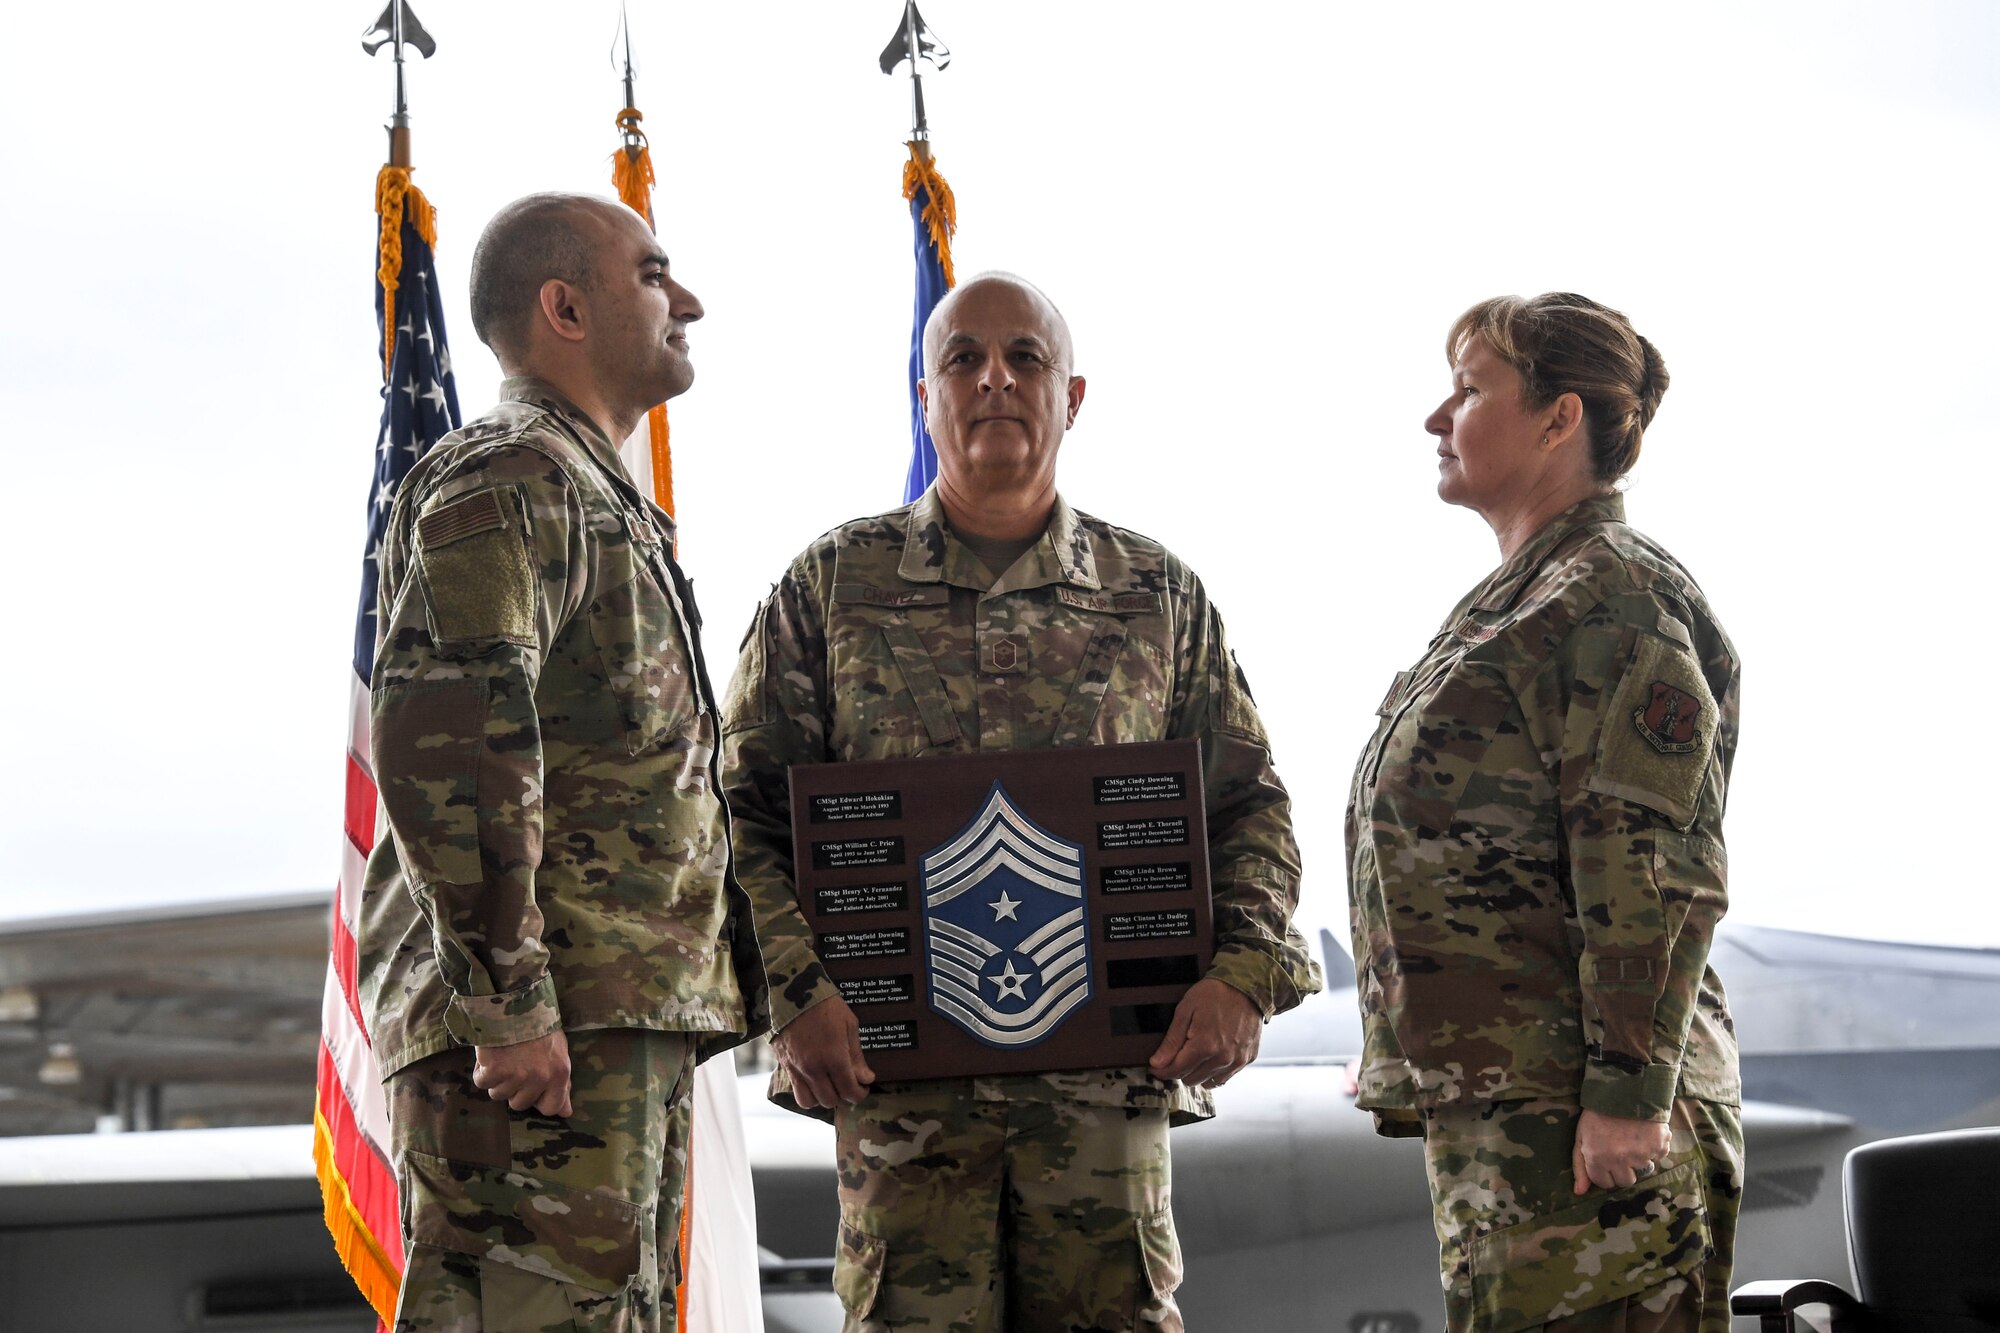 Chief Master Sgt. Lorene Kitzmiller accepts new responsibilities during an assumption of authority ceremony held at Fresno Air National Guard Base, California, as she becomes Command Chief of the 144th Fighter Wing Dec. 7, 2019